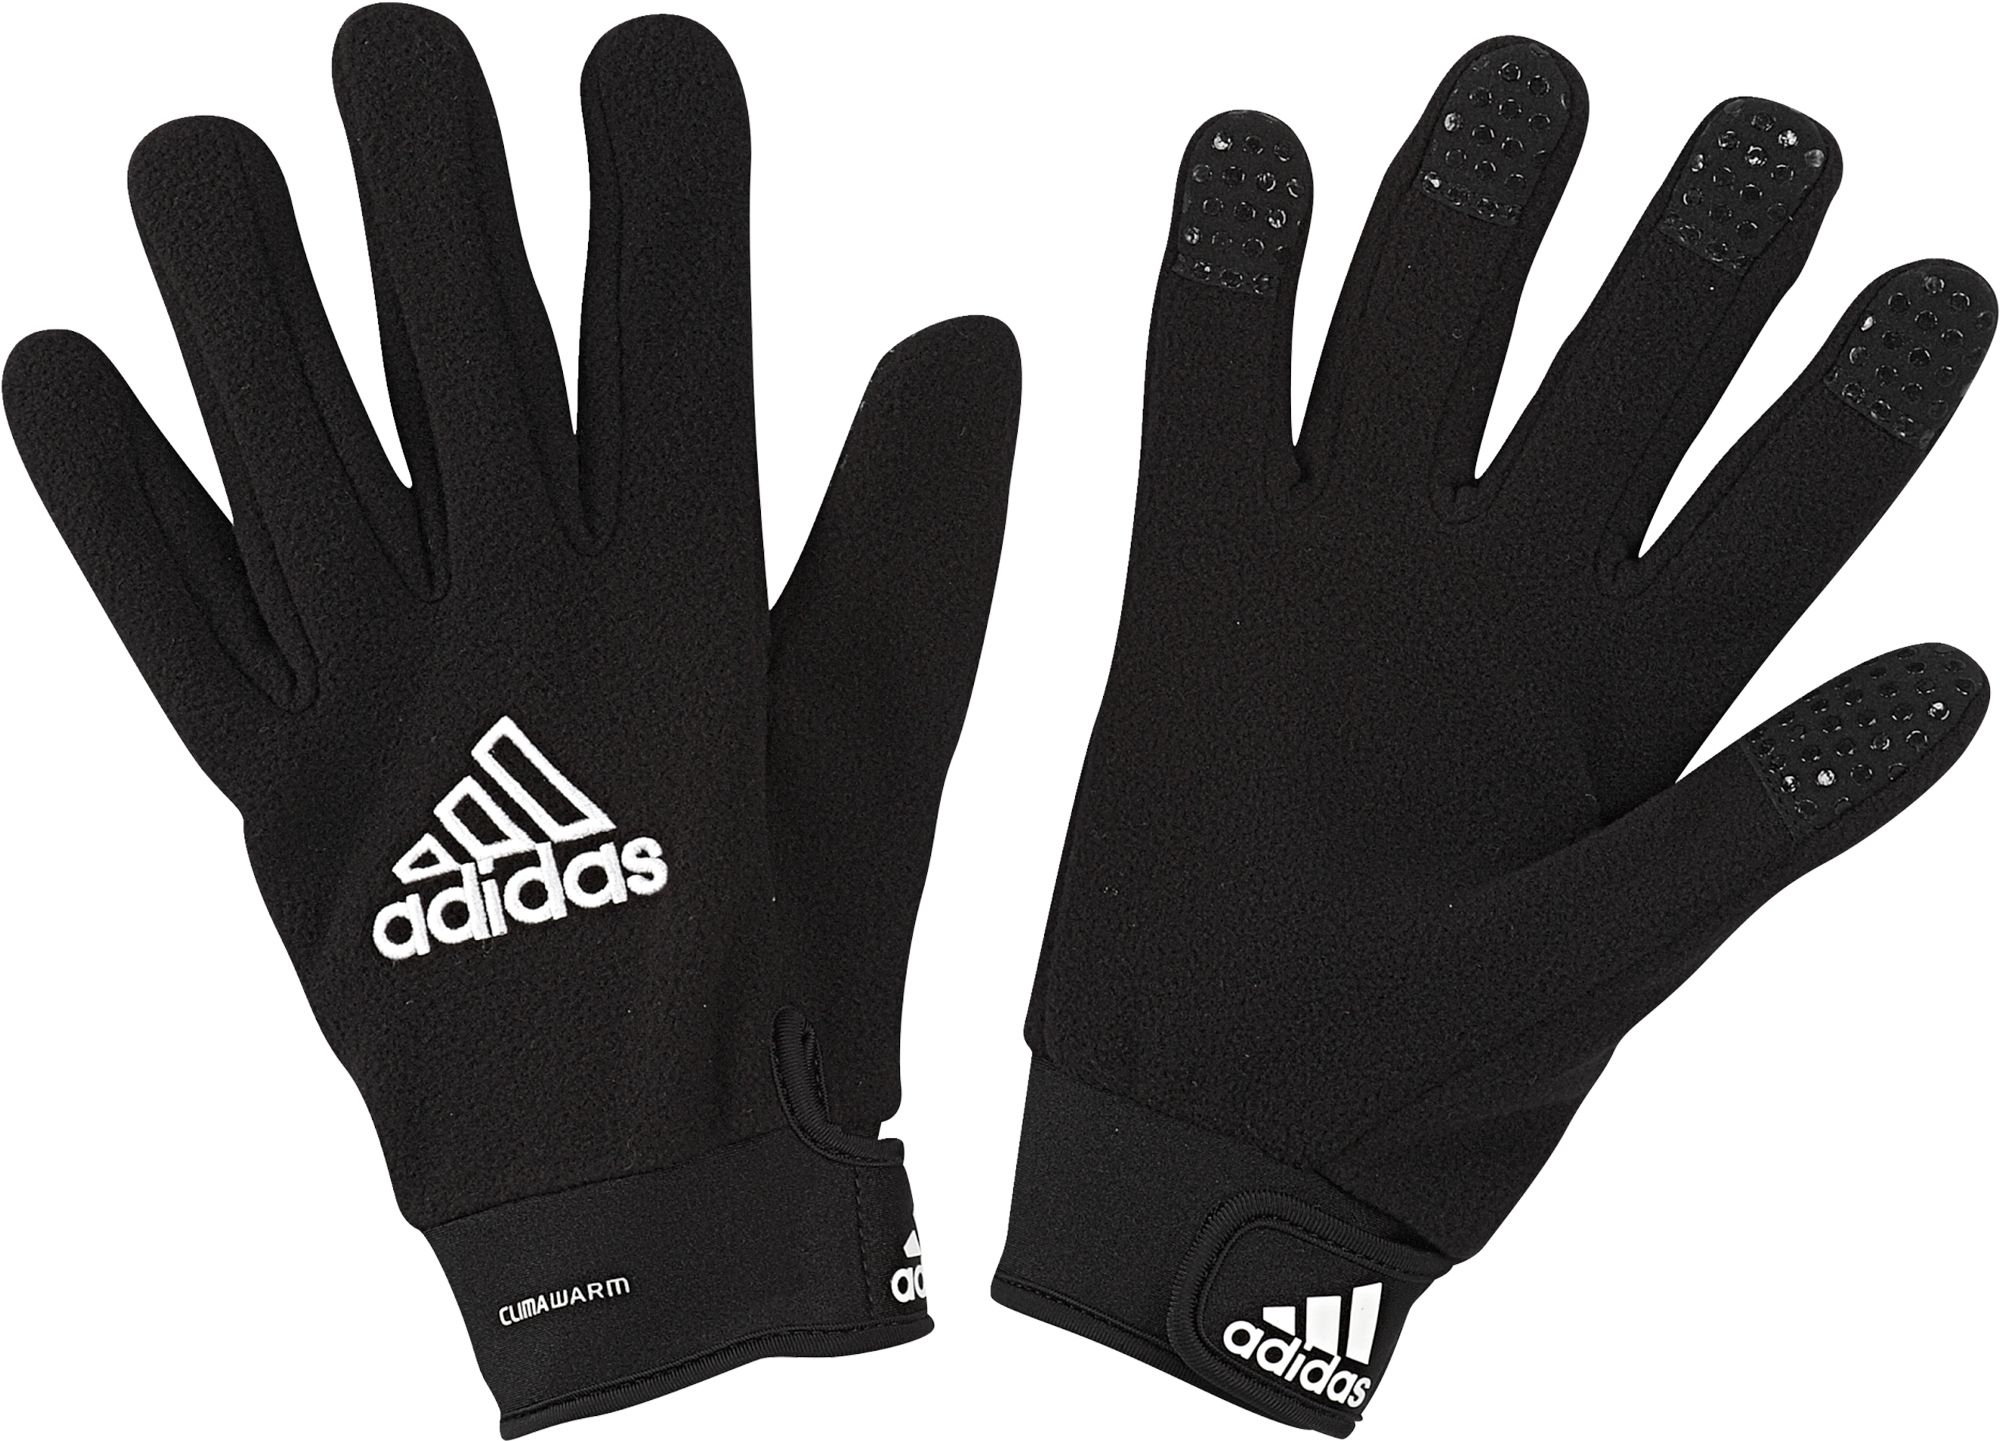 adidas performance field player climaproof gloves